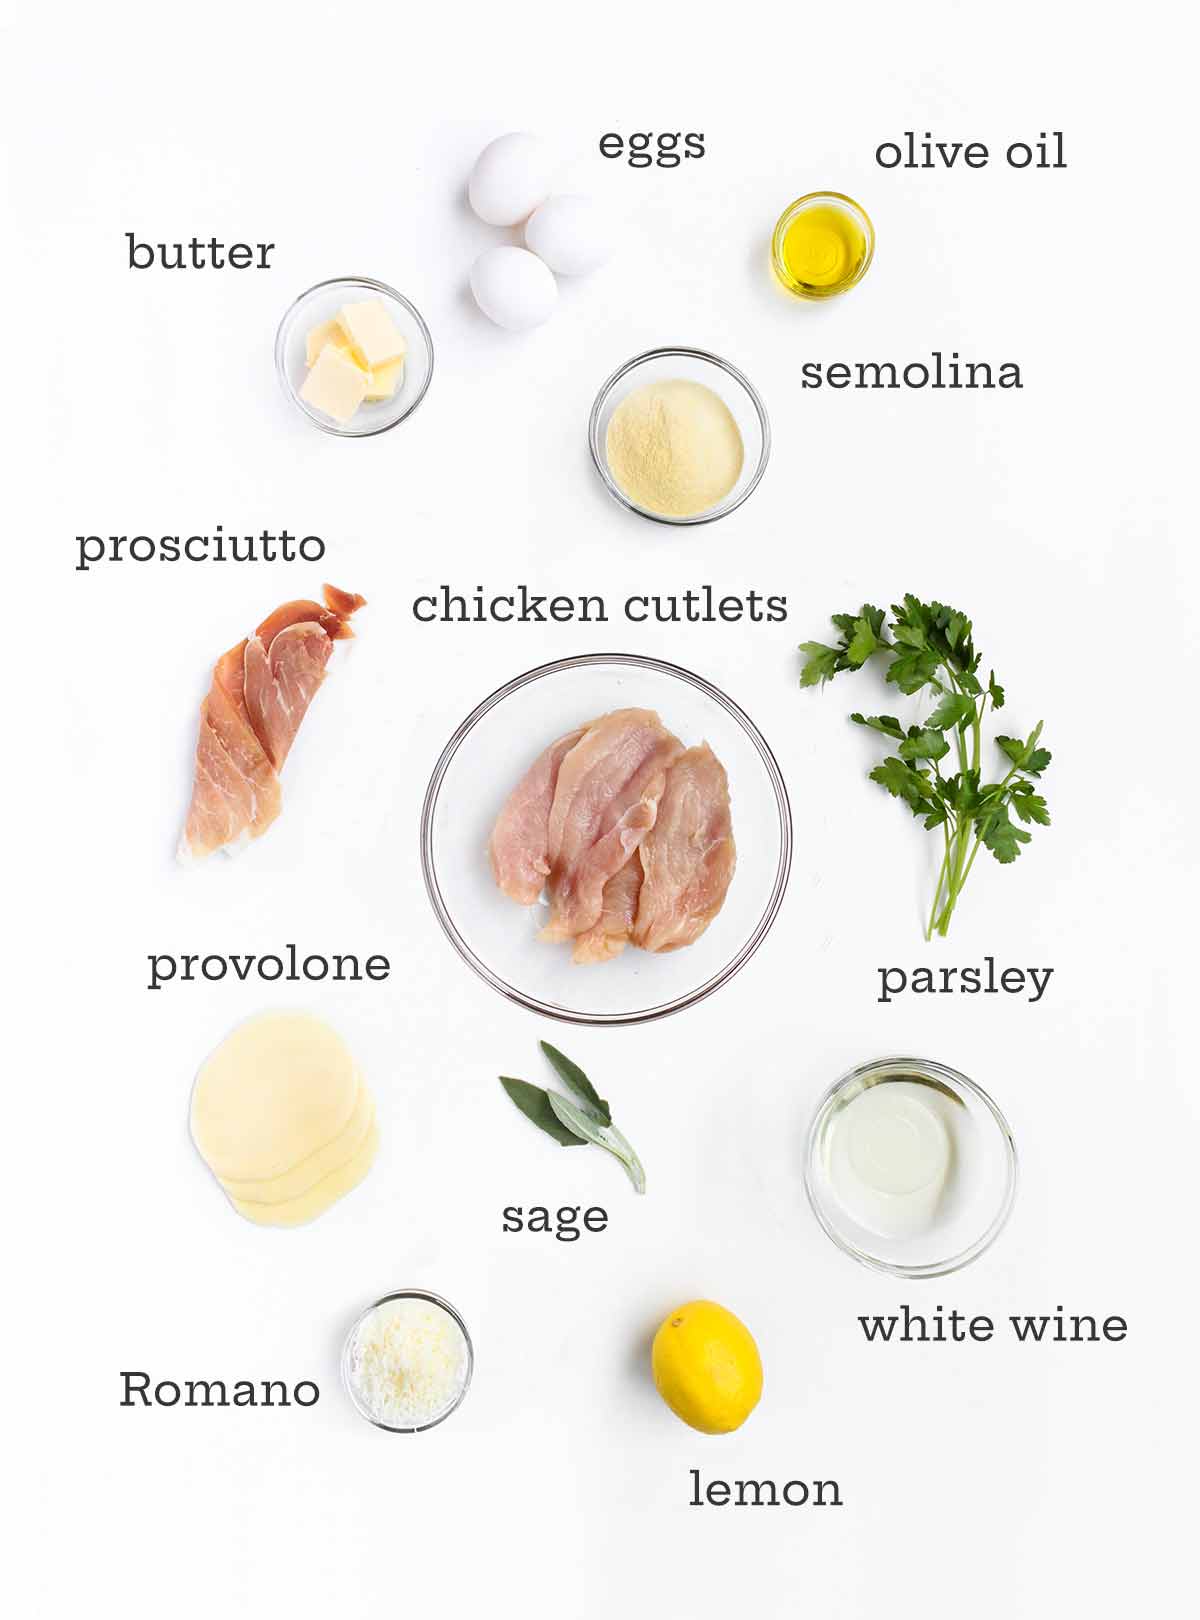 Chicken Saltimbocca Ingredients: Chicken, eggs, cheese, herbs, olive oil, wine, butter and prosciutto.